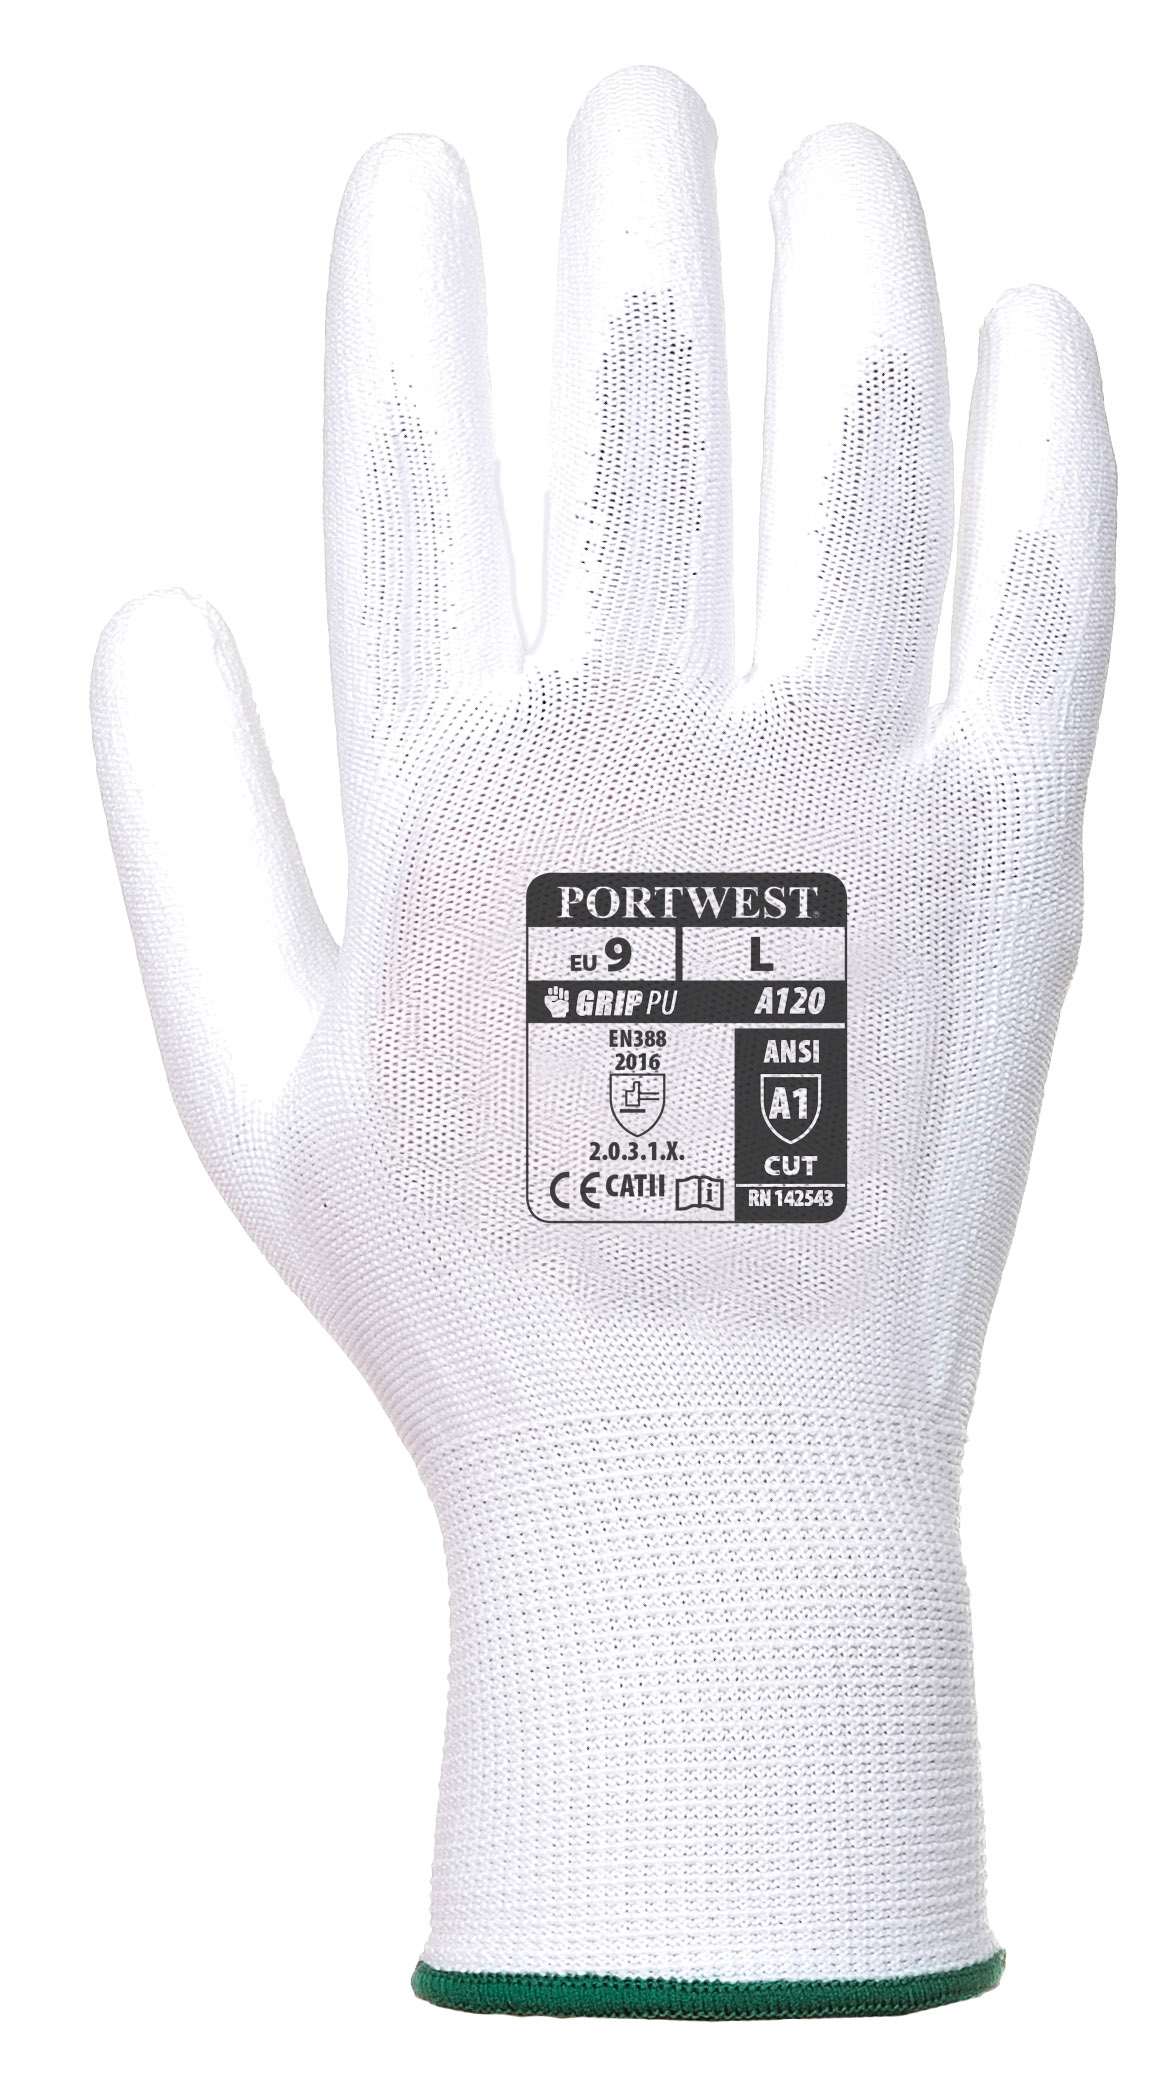 Portwest A120 Colourful Nylon PU Palm Coated Breathable Gardening Gloves 